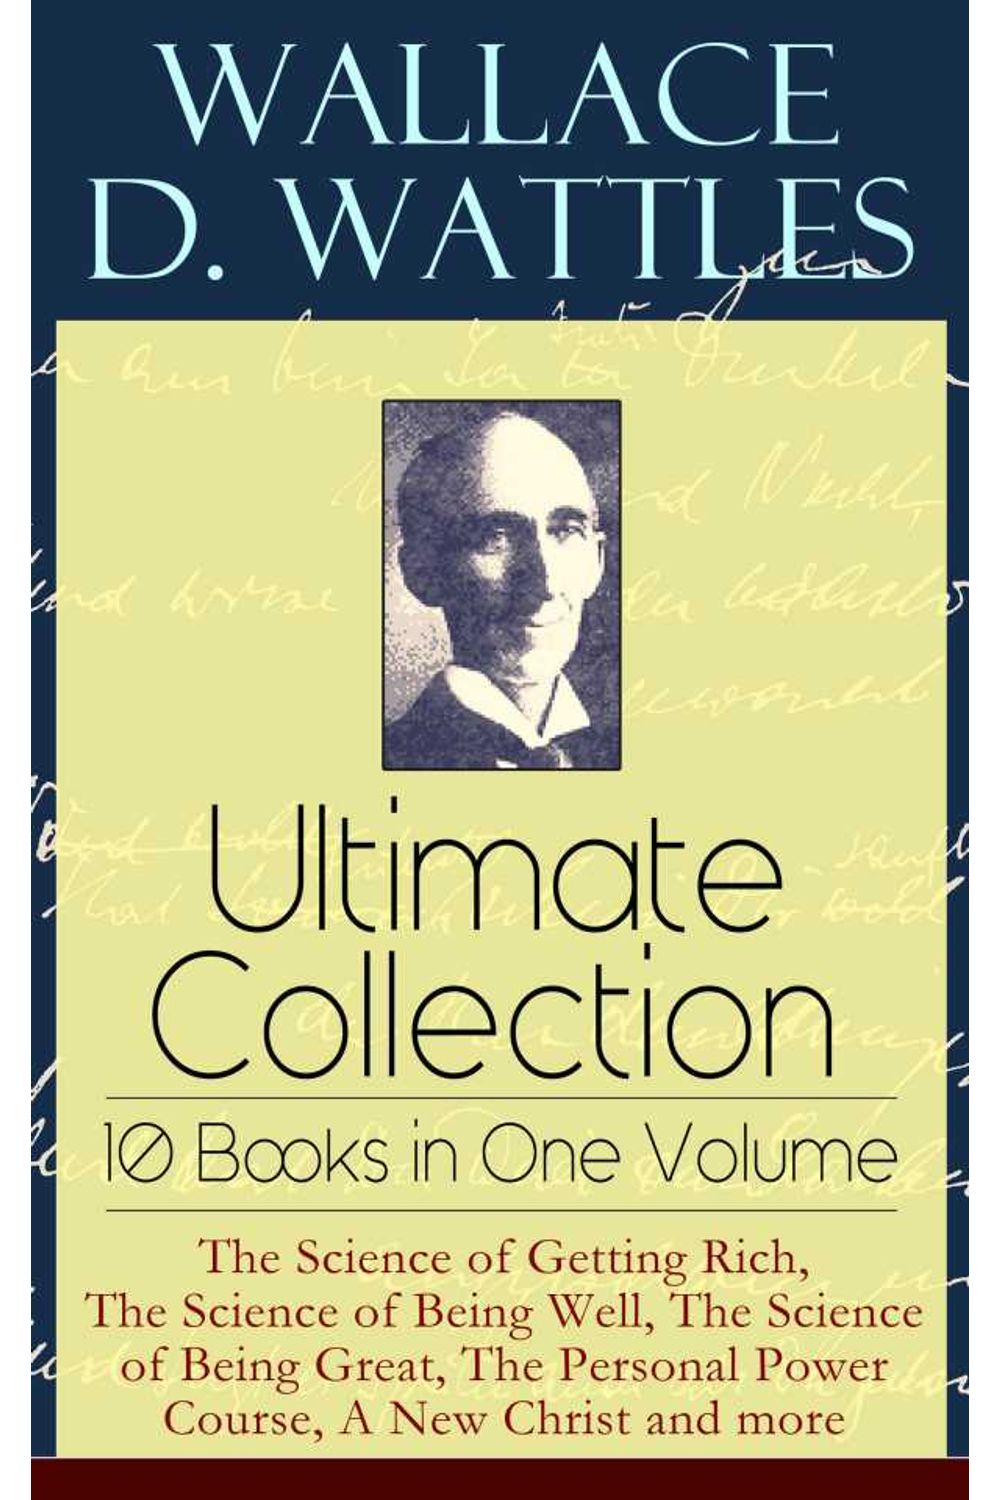 bw-wallace-d-wattles-ultimate-collection-ndash-10-books-in-one-volume-the-science-of-getting-rich-the-science-of-being-well-the-science-of-being-great-the-personal-power-course-a-new-christ-and-more-eartnow-9788026843221